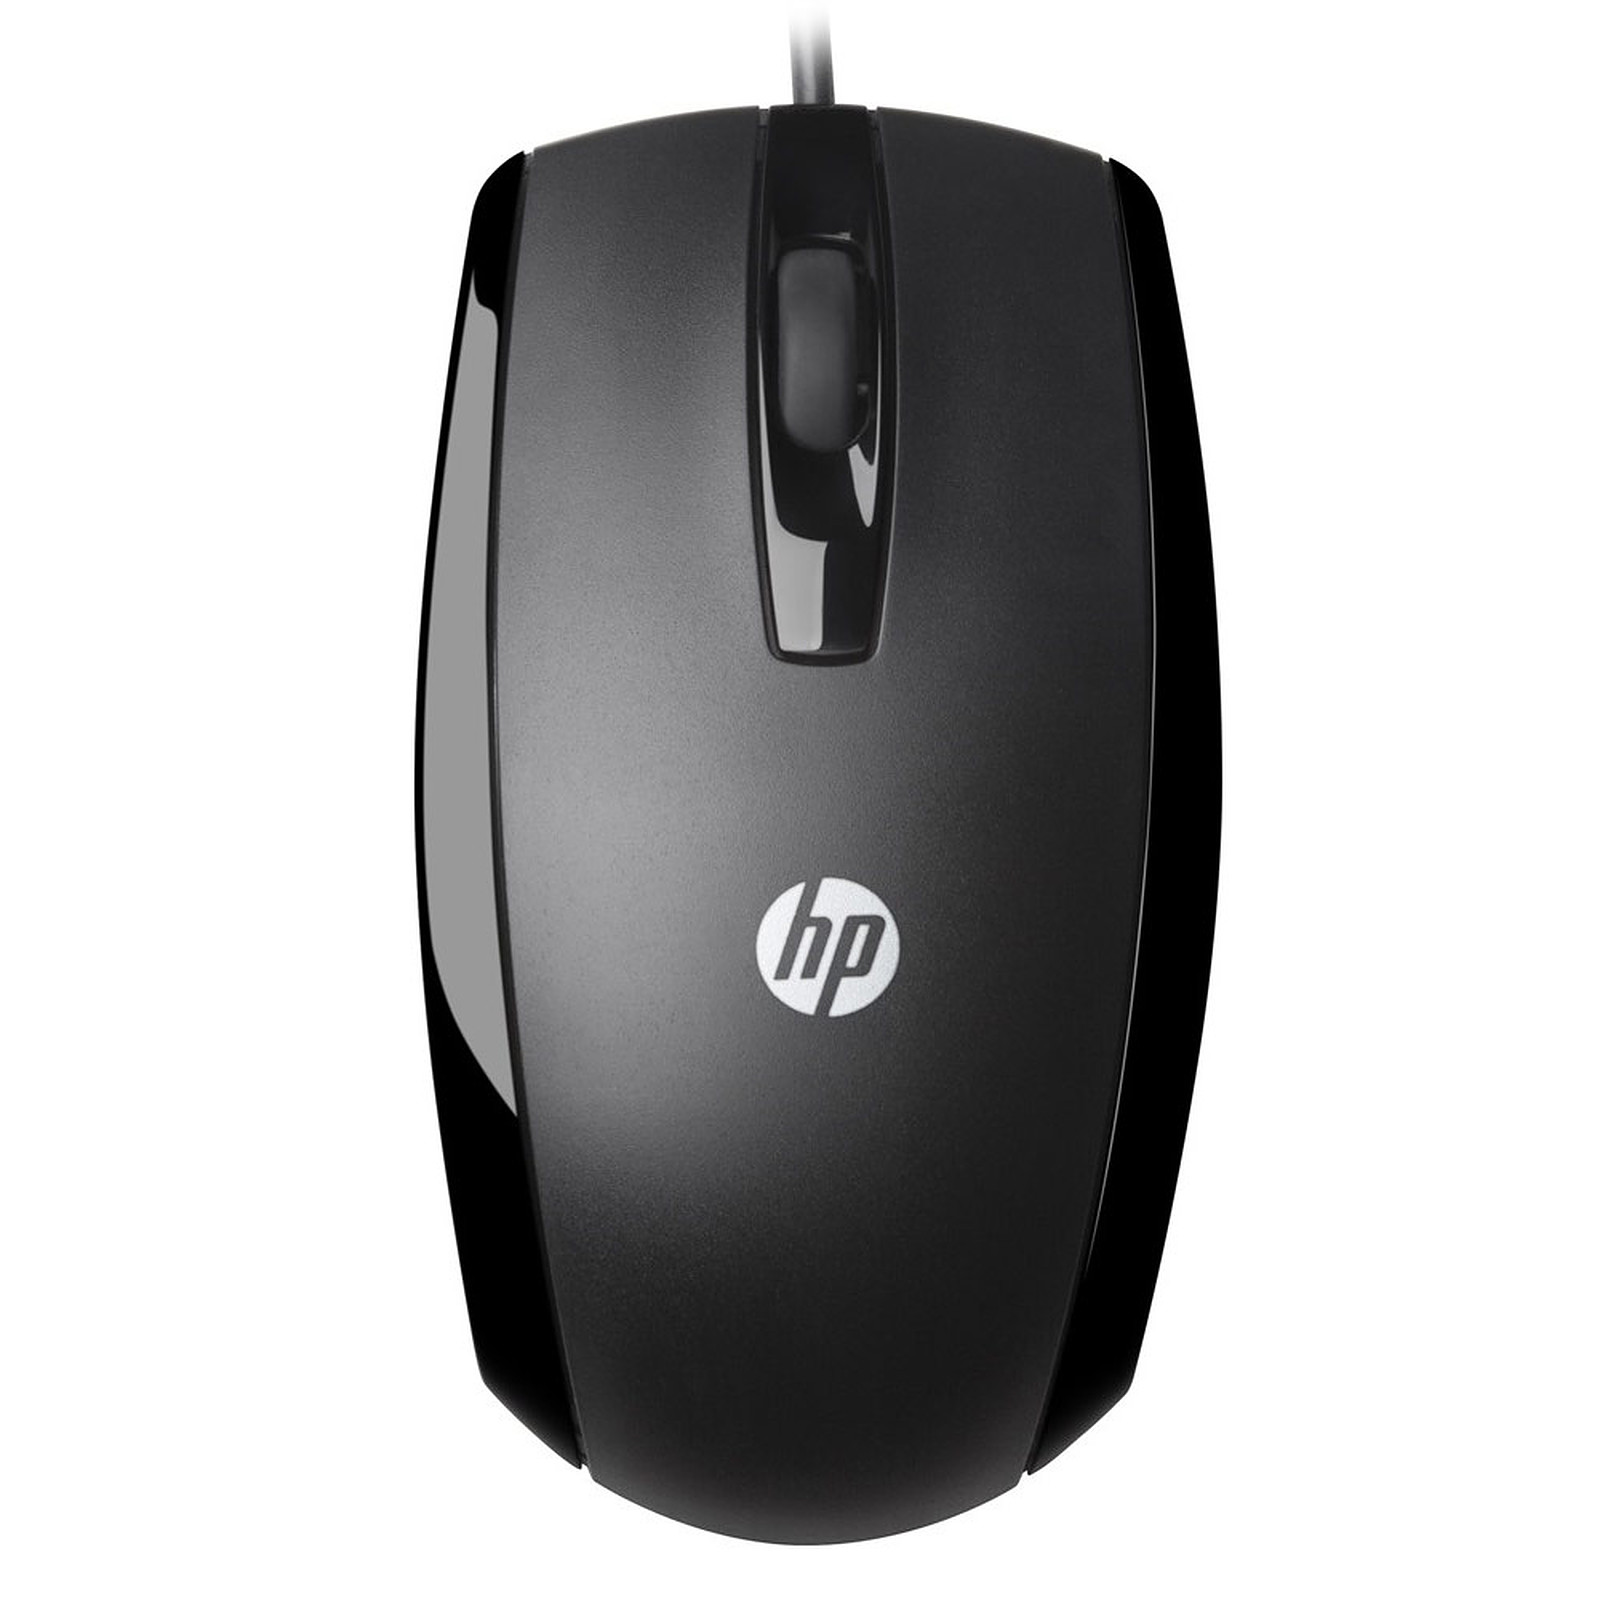 Souris HP Wired avec fil Mouse X500 - PREMICE COMPUTER